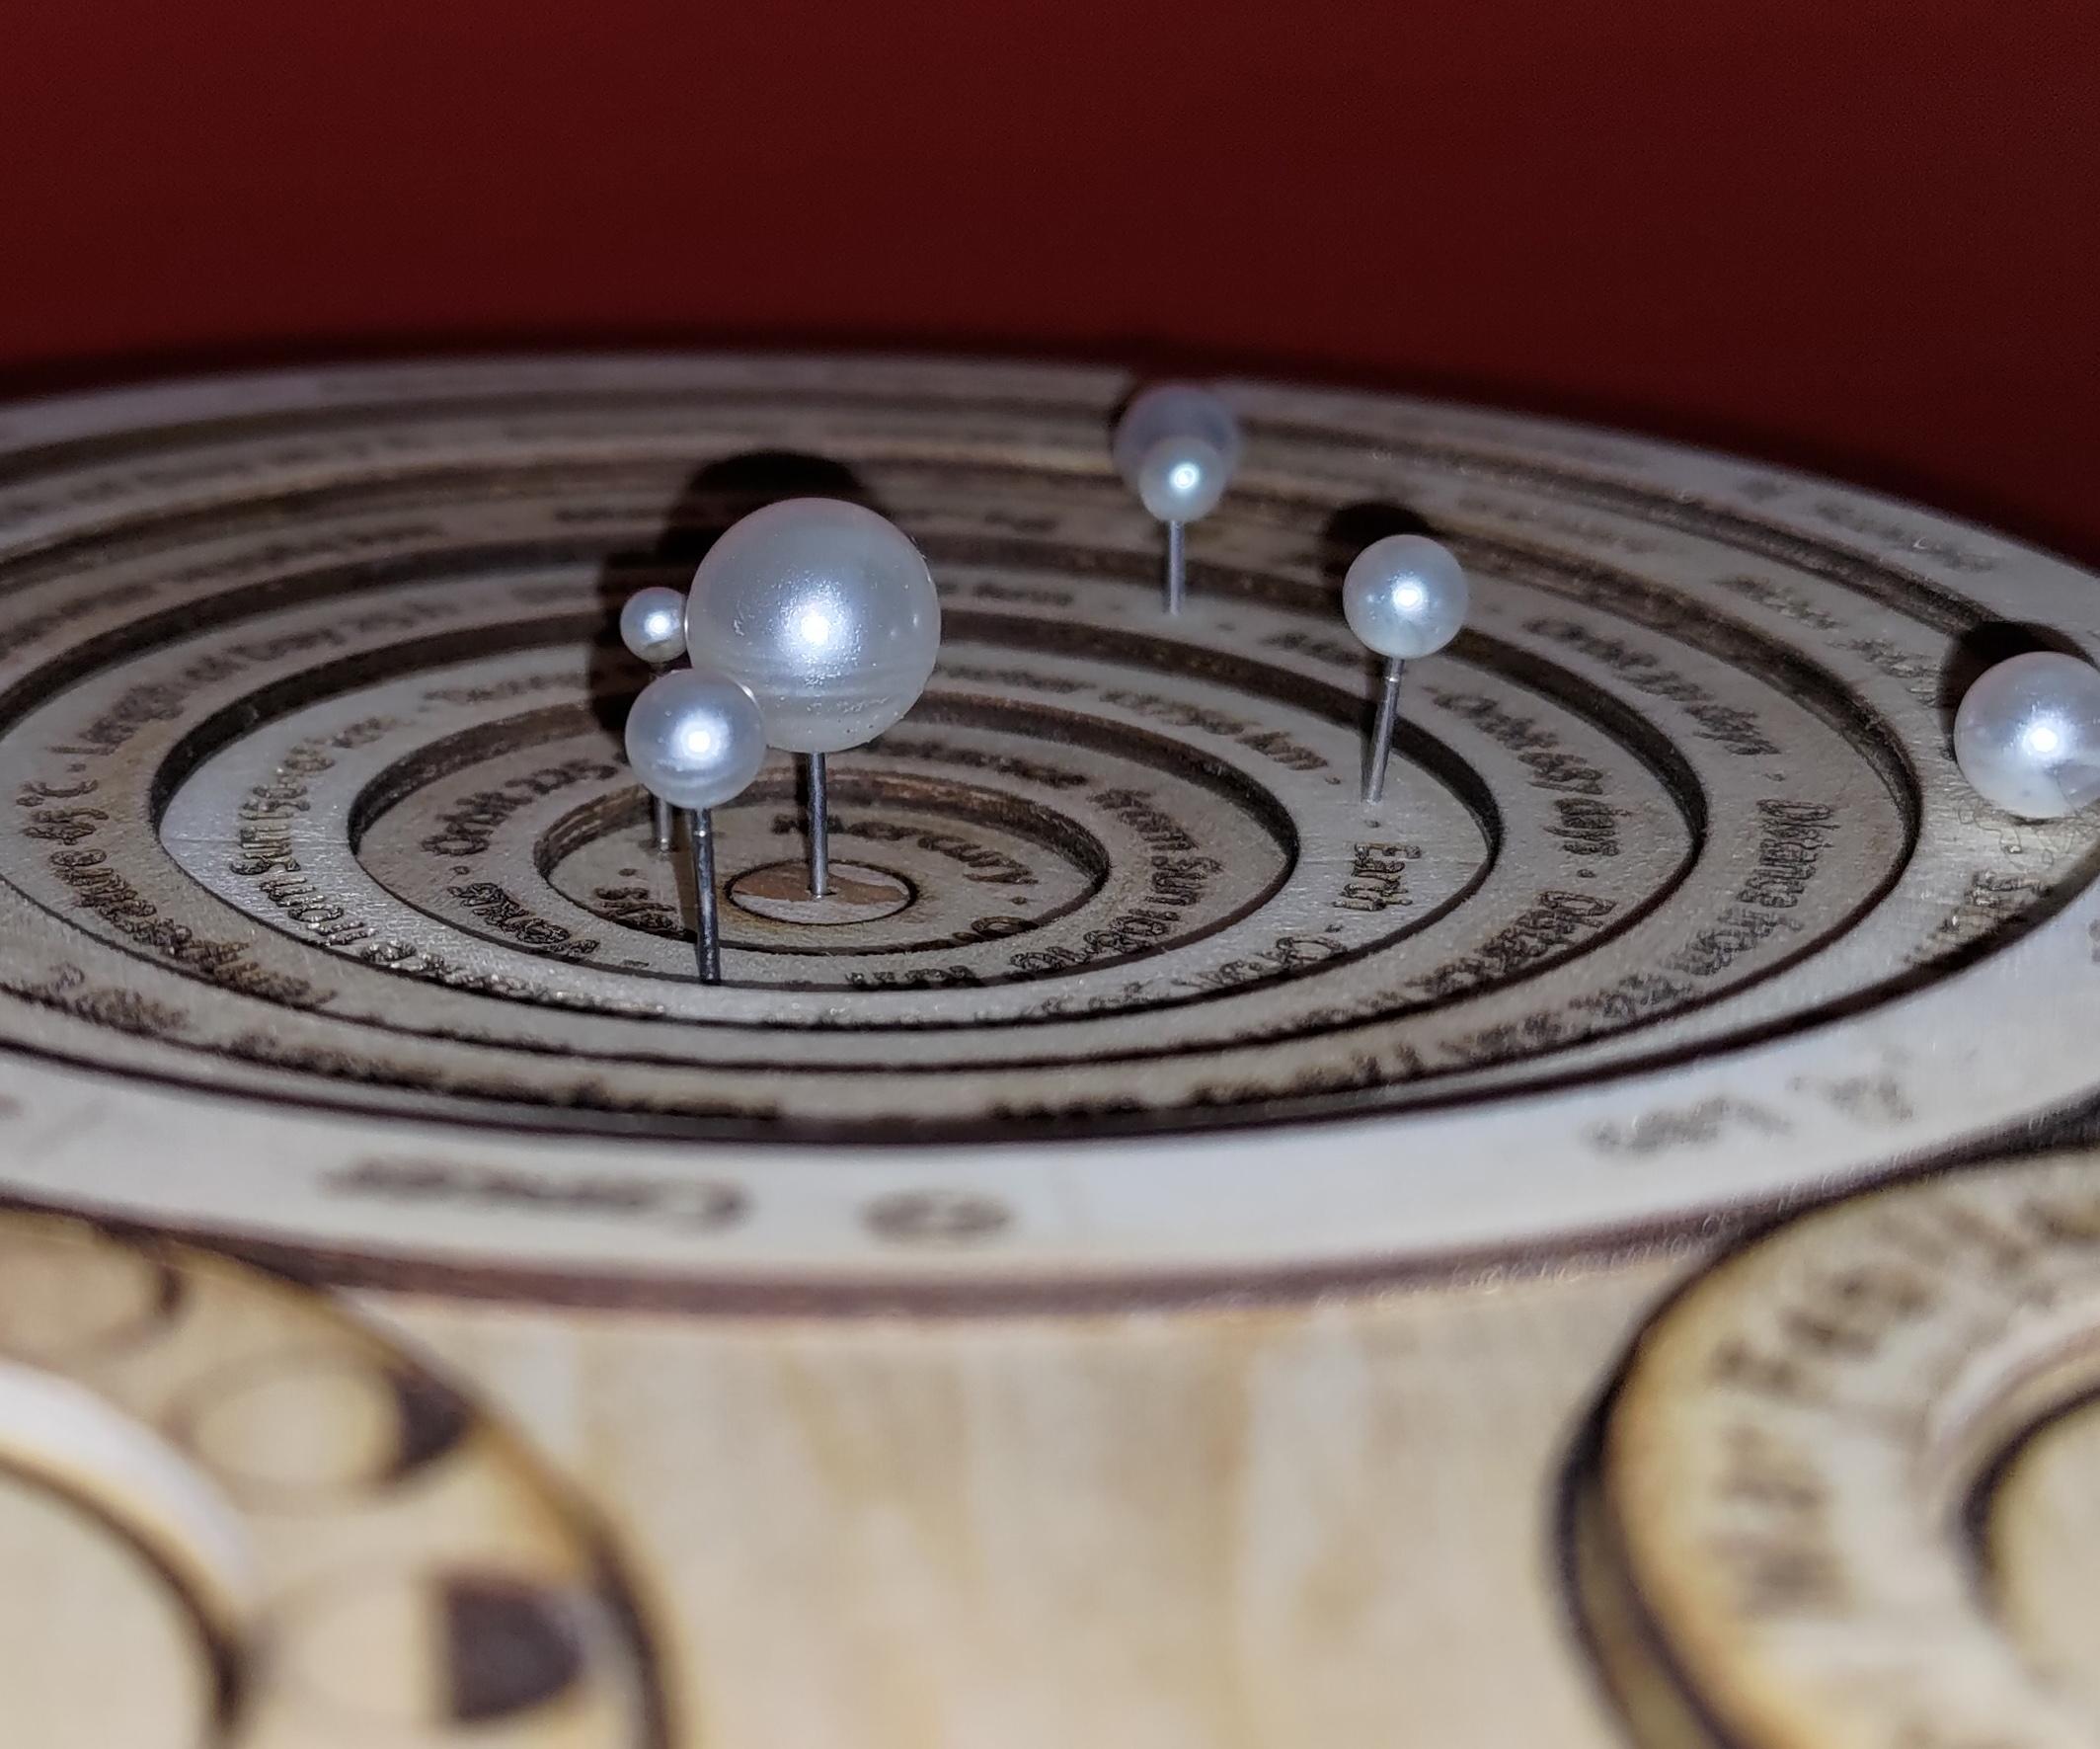 Craft Your Own Cosmic Clock With This Easy to Build Celestiscope.